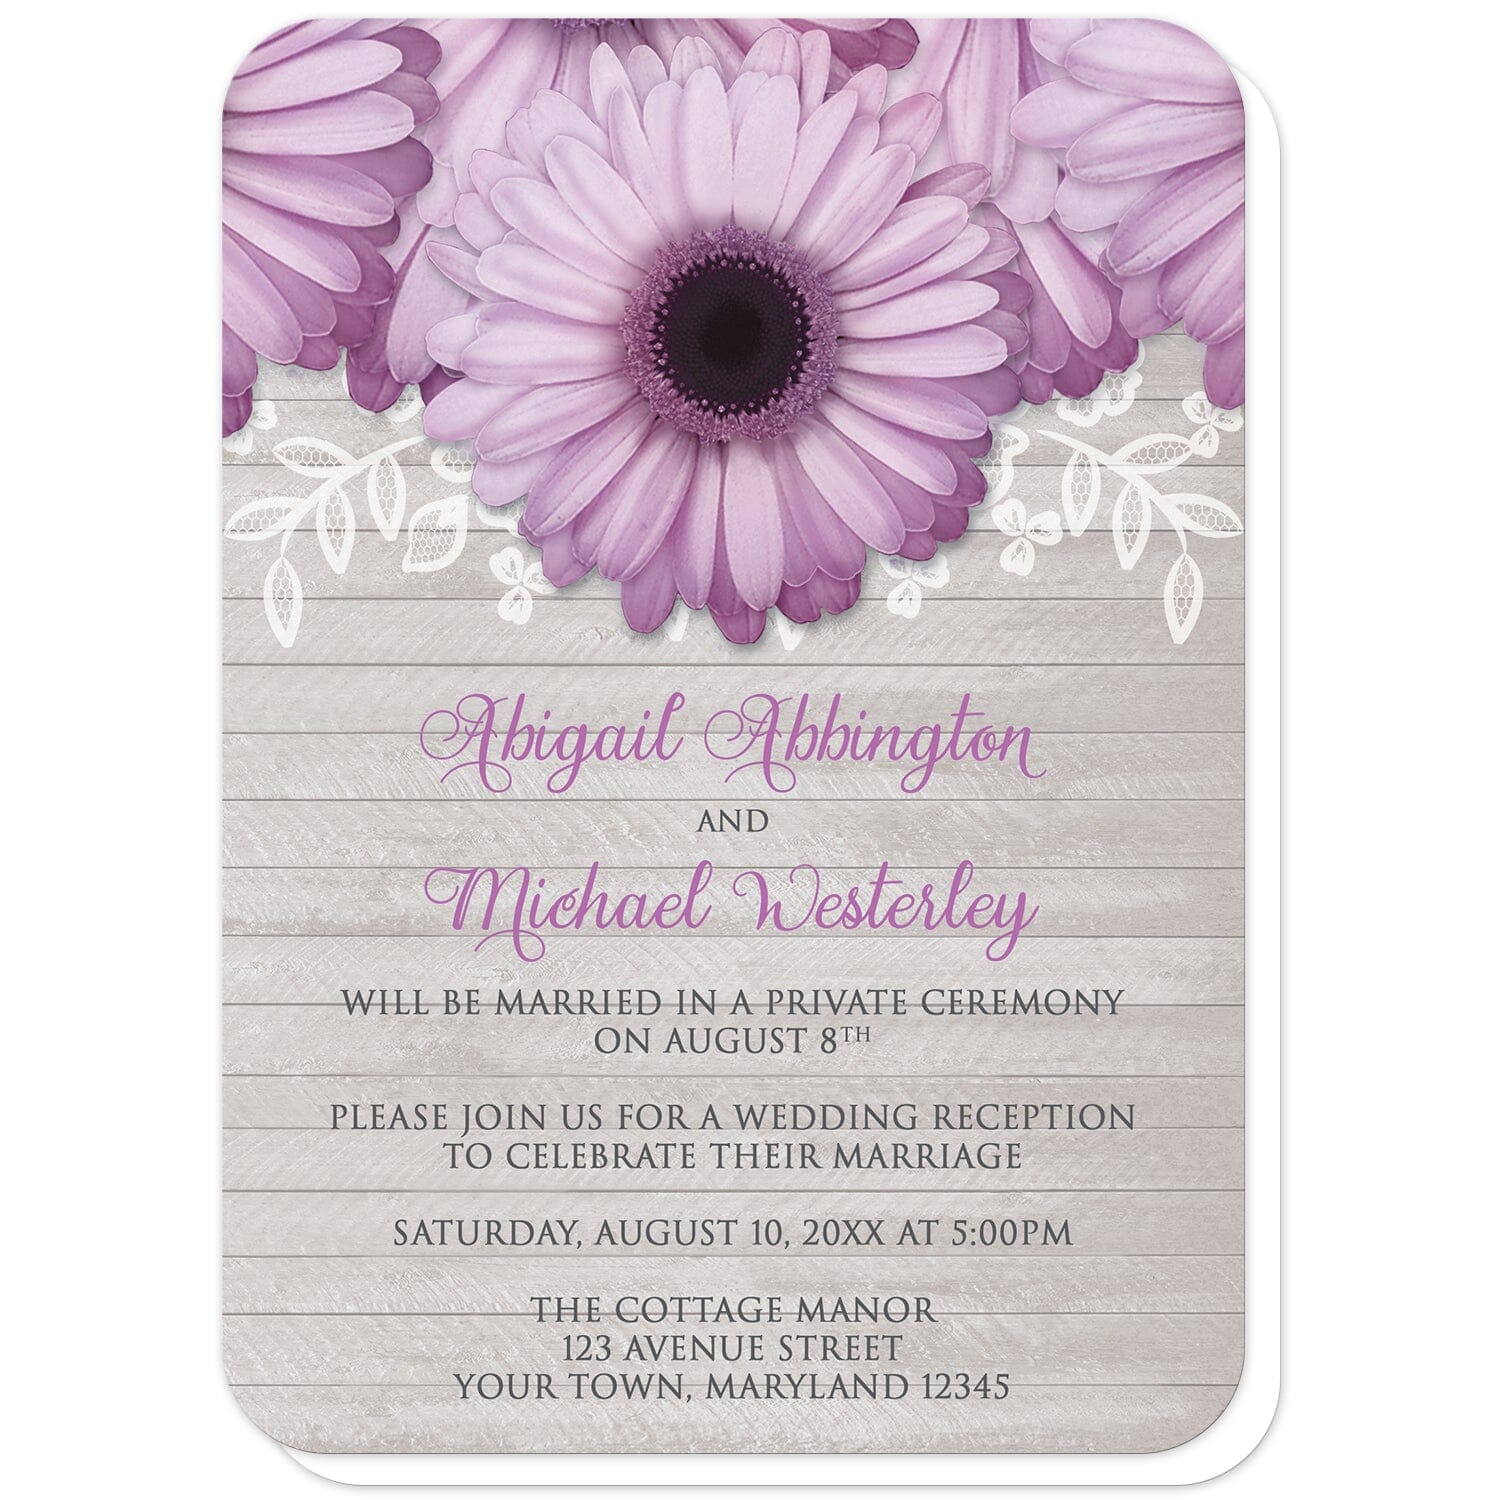 Rustic Purple Daisy Gray Wood Reception Only Invitations (with rounded corners) at Artistically Invited. Rustic purple daisy gray wood reception only invitations designed with large and lovely purple daisy flowers with a white lace overlay along the top over a light gray wood background illustration. Your personalized post-wedding reception details are custom printed in purple and dark gray over the wood background design below the pretty purple daisies.